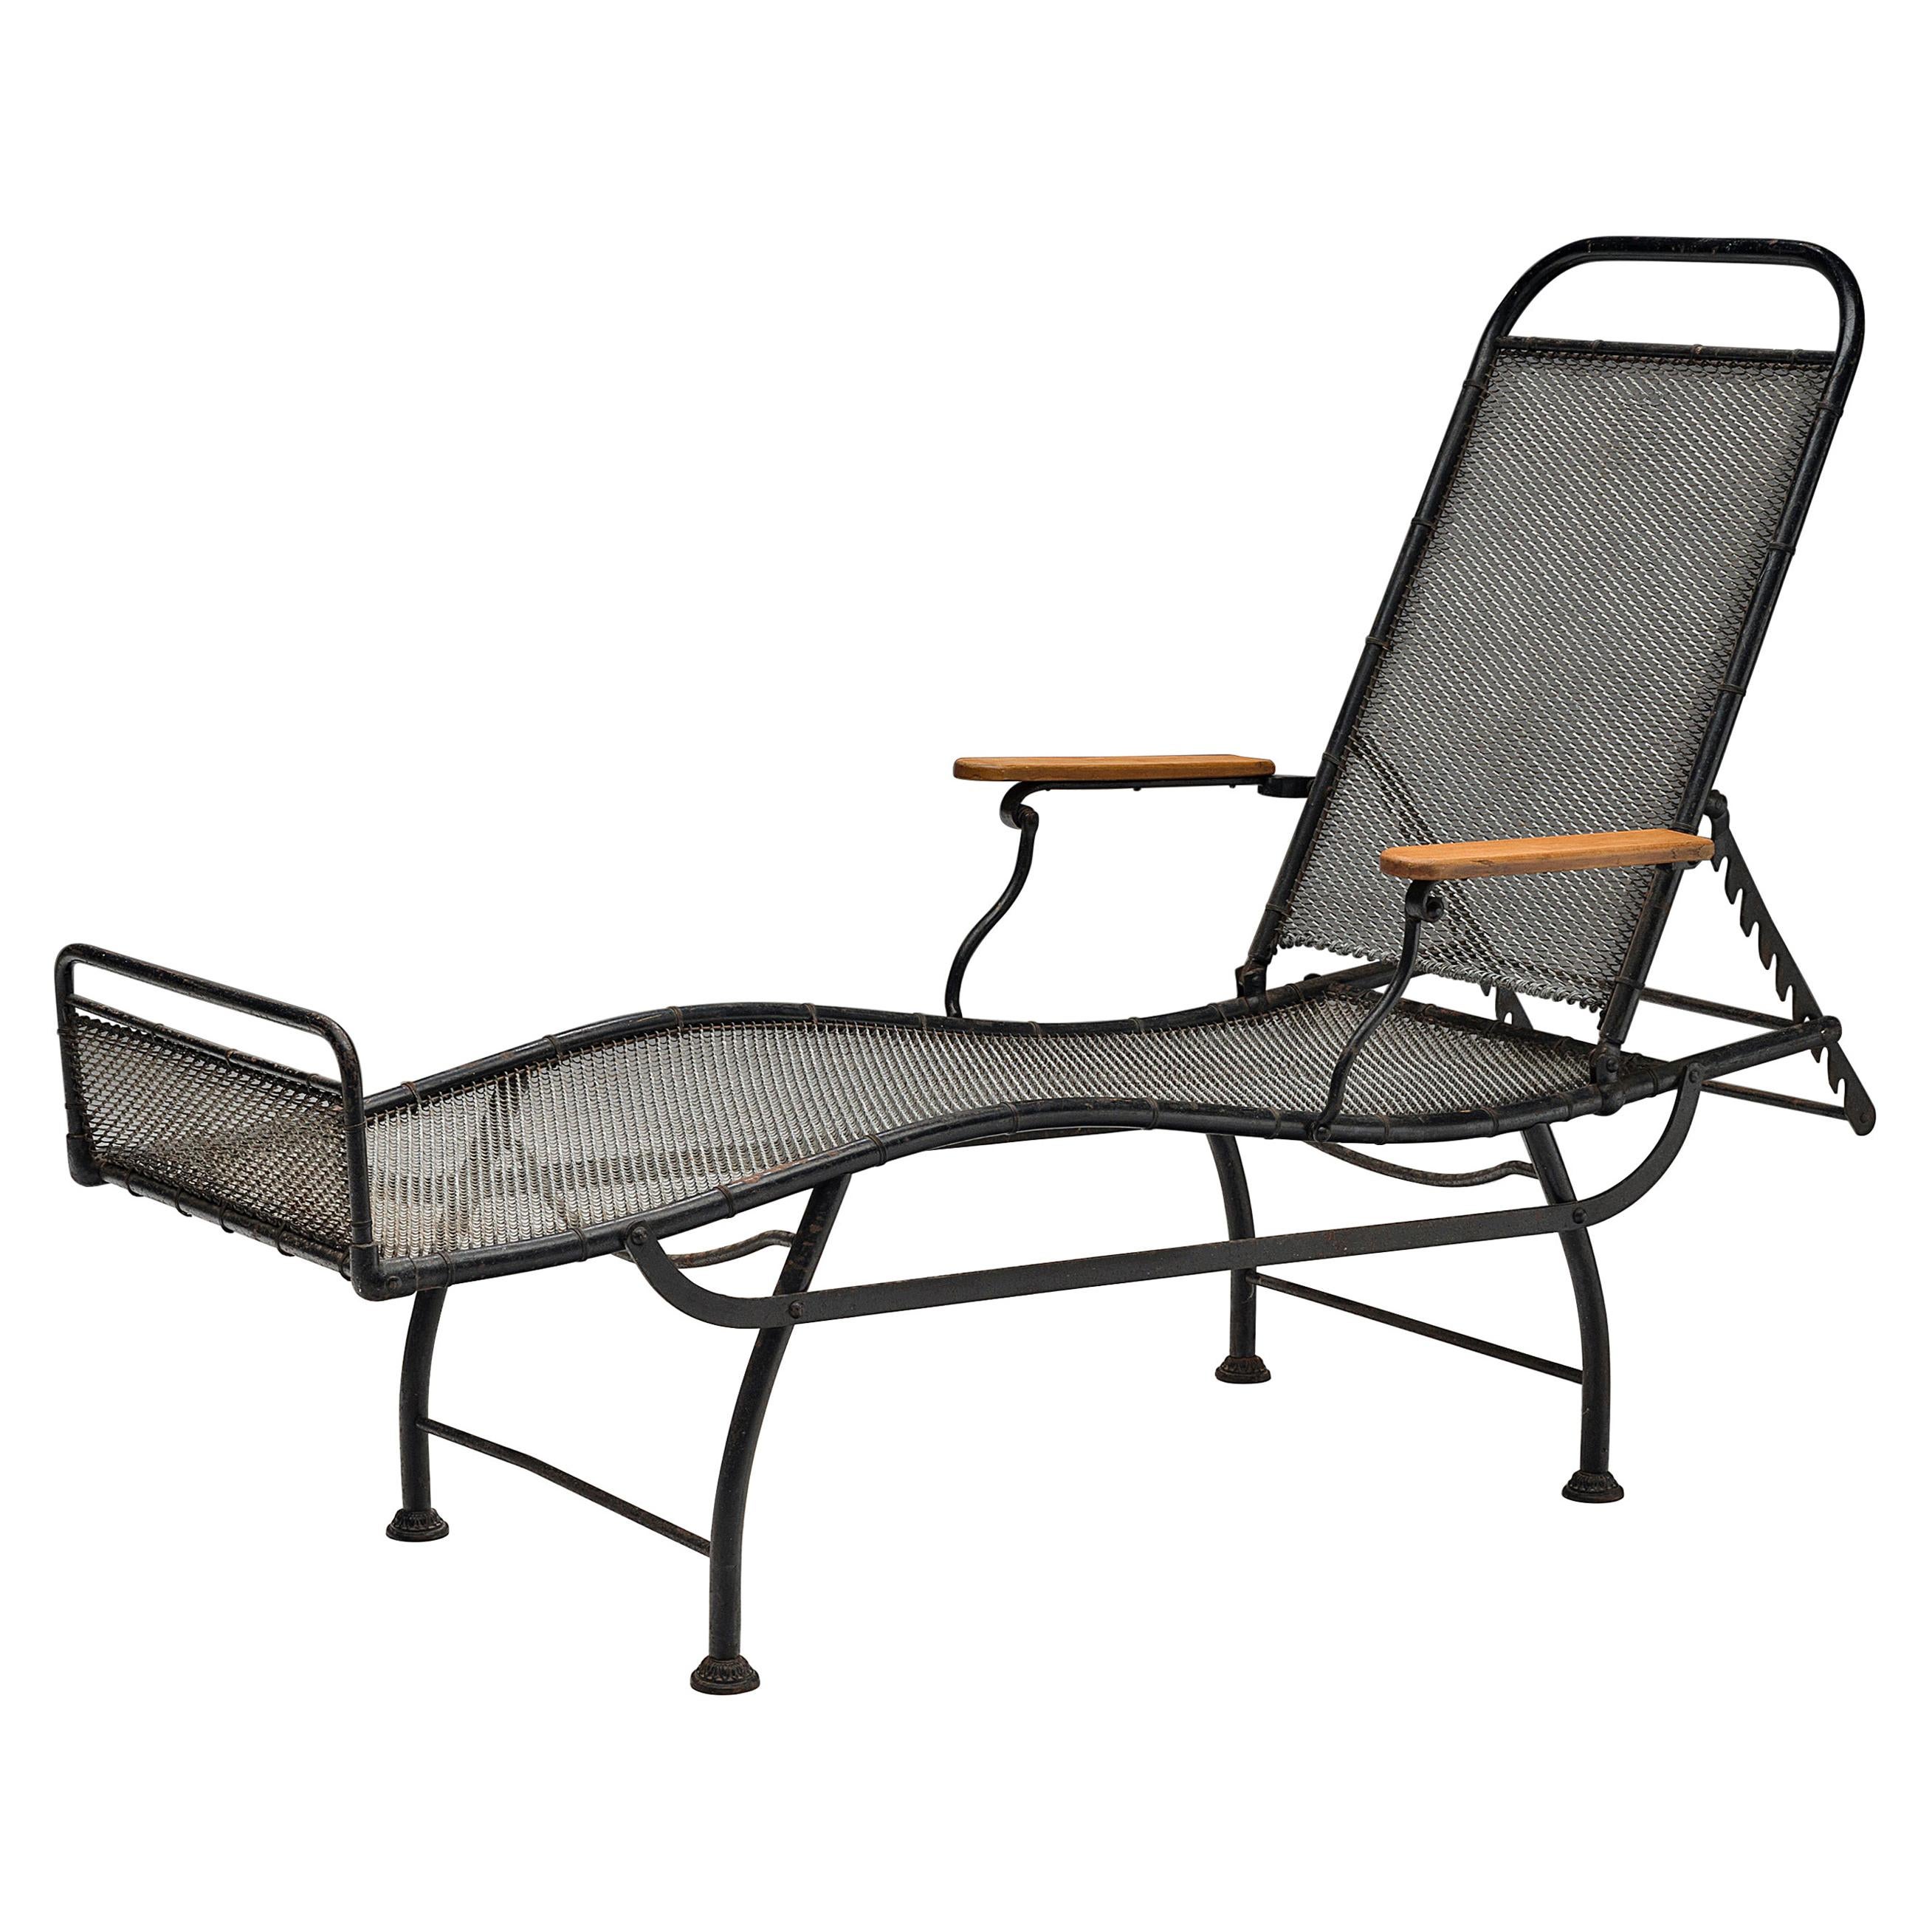 Jean Prouvé Inspired Adjustable Chaise Longue in Black Metal and Wood